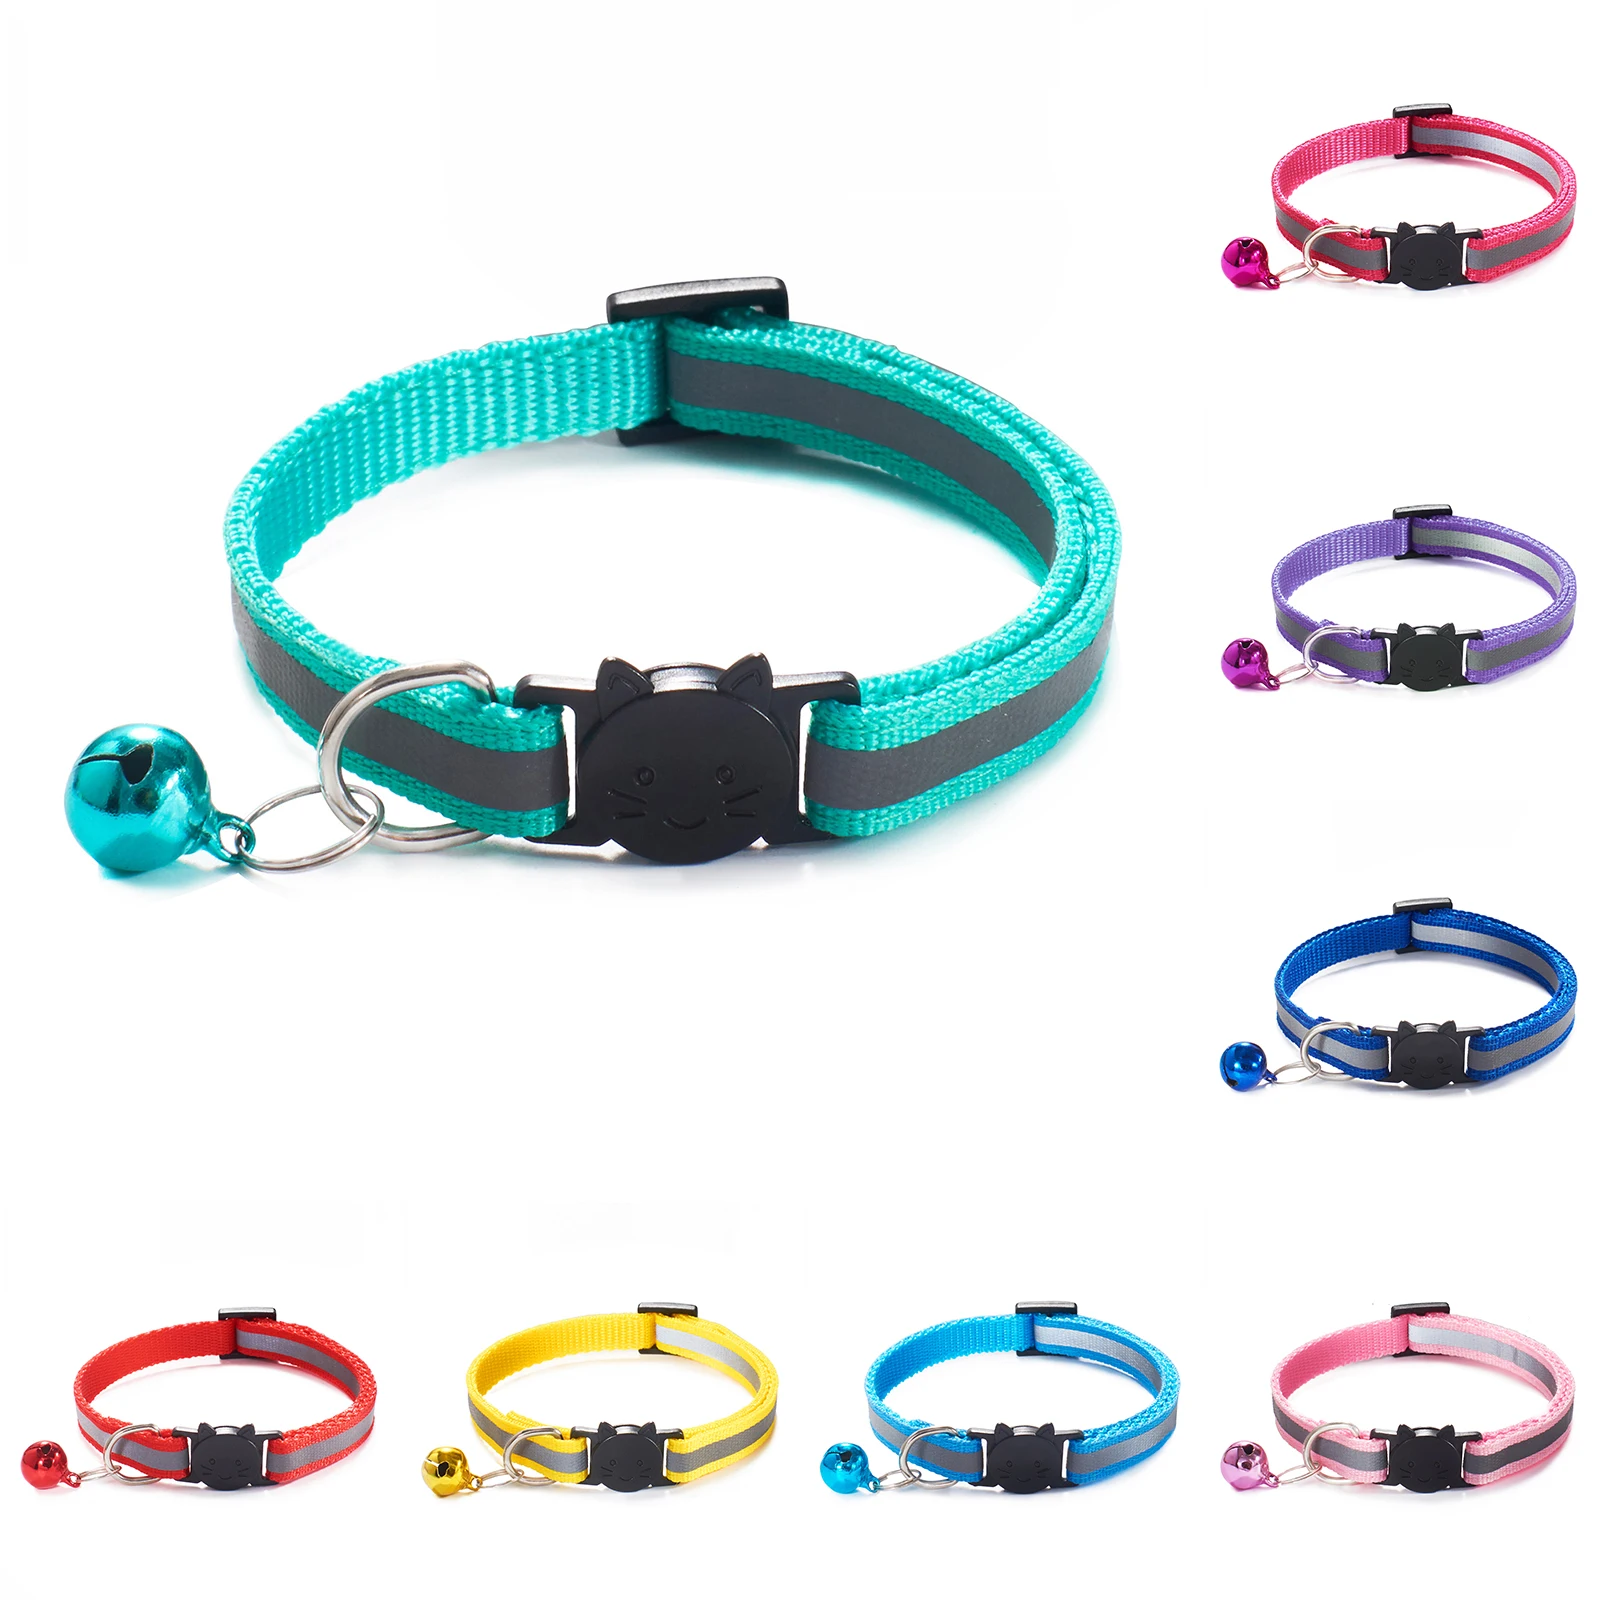 Reflective Pet Collar Adjustable Pet Kitten Reflective Necklace for Small Pet Animals Cat Collar with Bells Breakaway Cat Collar 2/4/6 Pack Free Replacement 